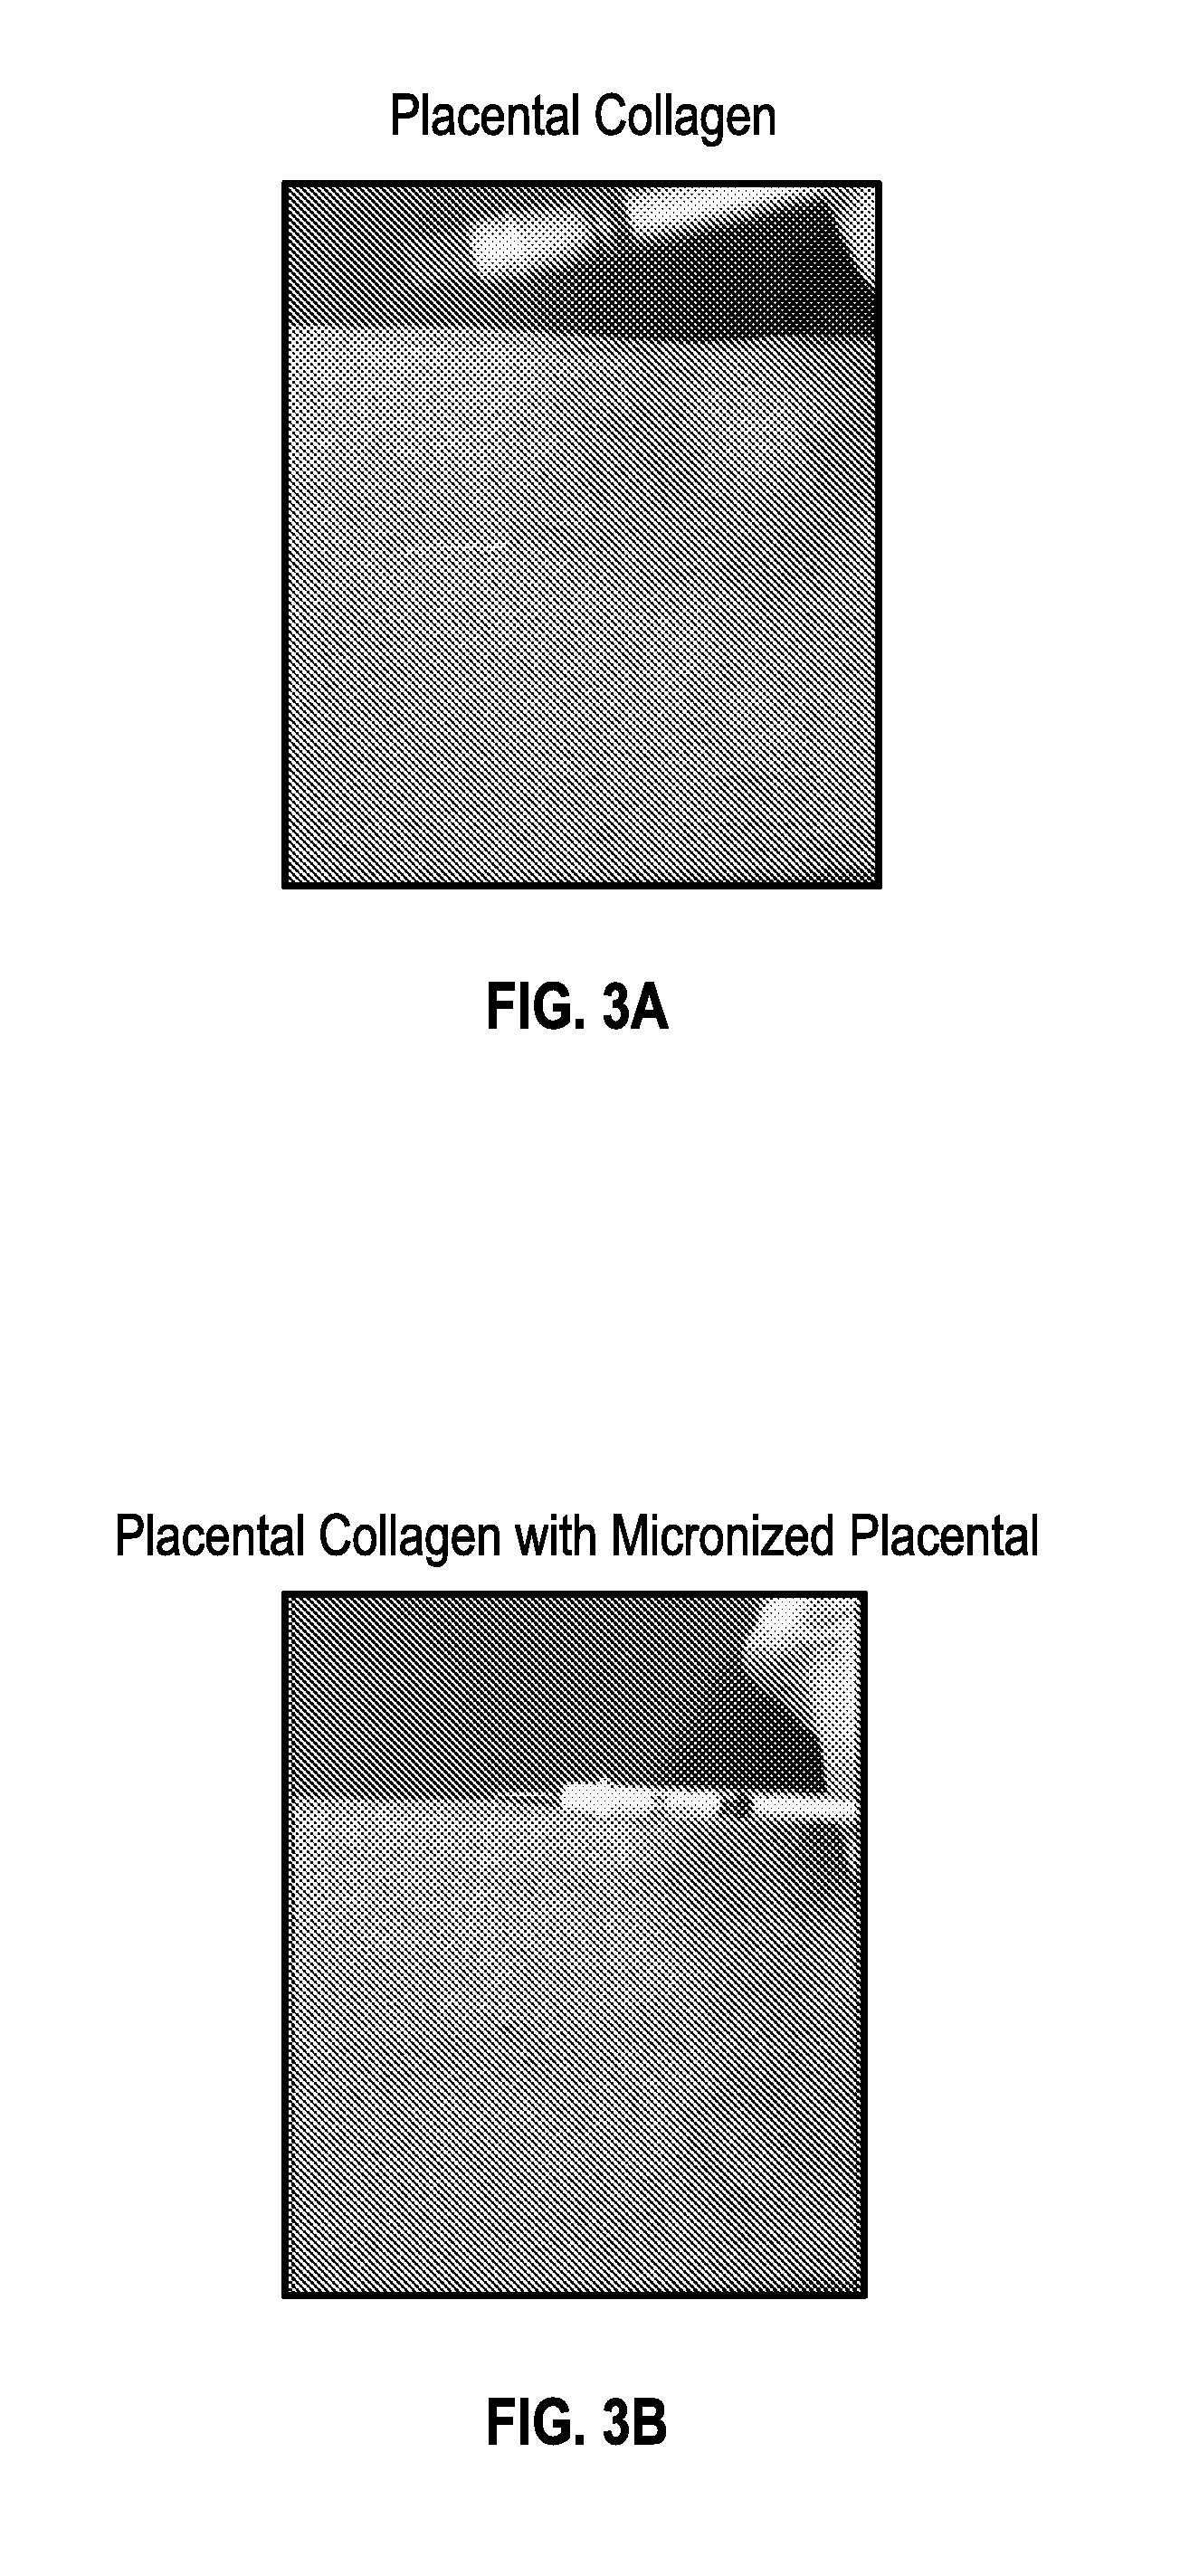 Collagen and micronized placental tissue compositions and methods of making and using the same